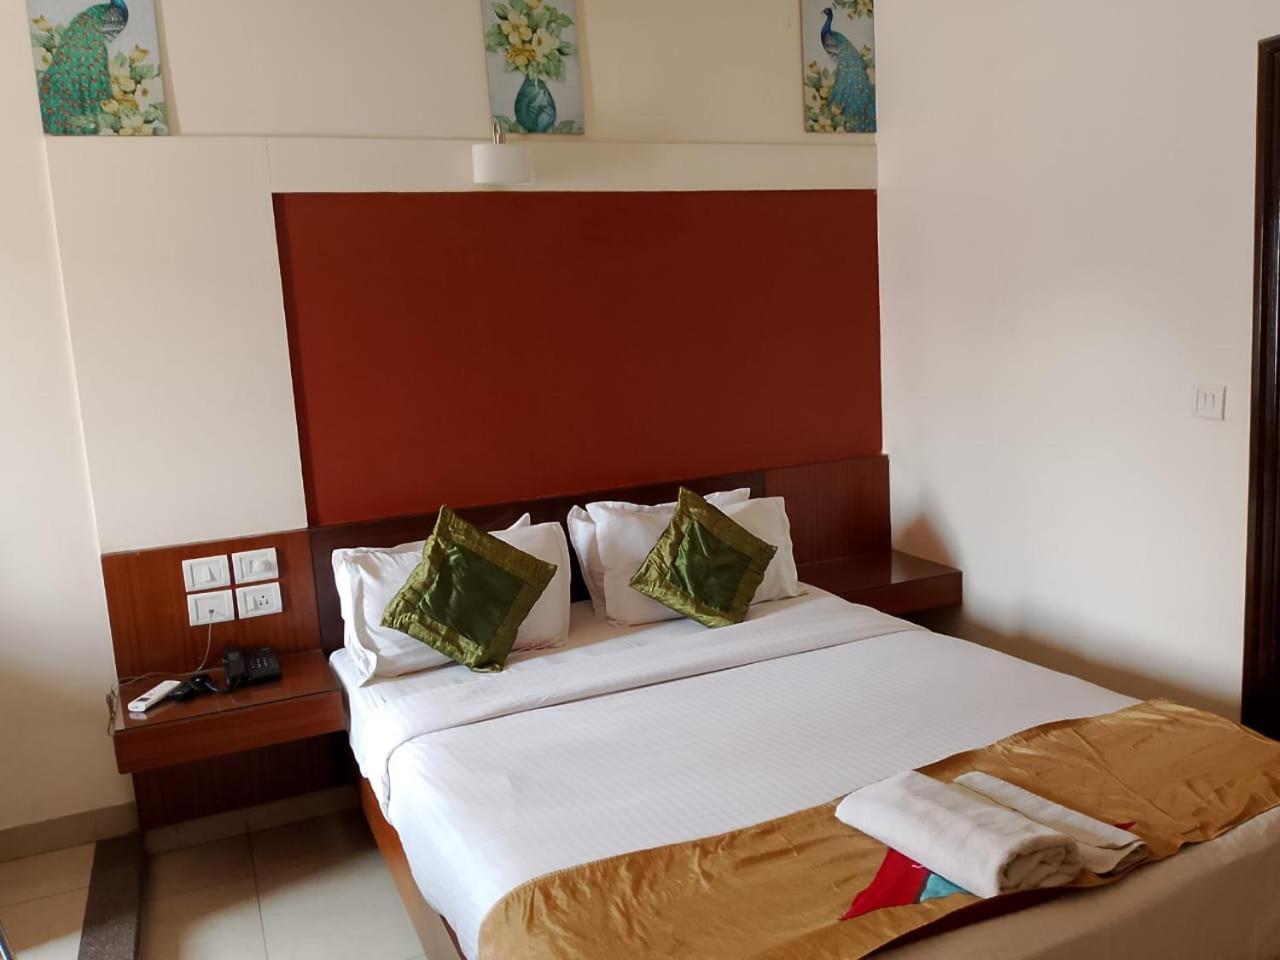 Cubbon Suites - 10 Minute Walk To Mg Road, Mg Road Metro And Church Street บังกาลอร์ ภายนอก รูปภาพ